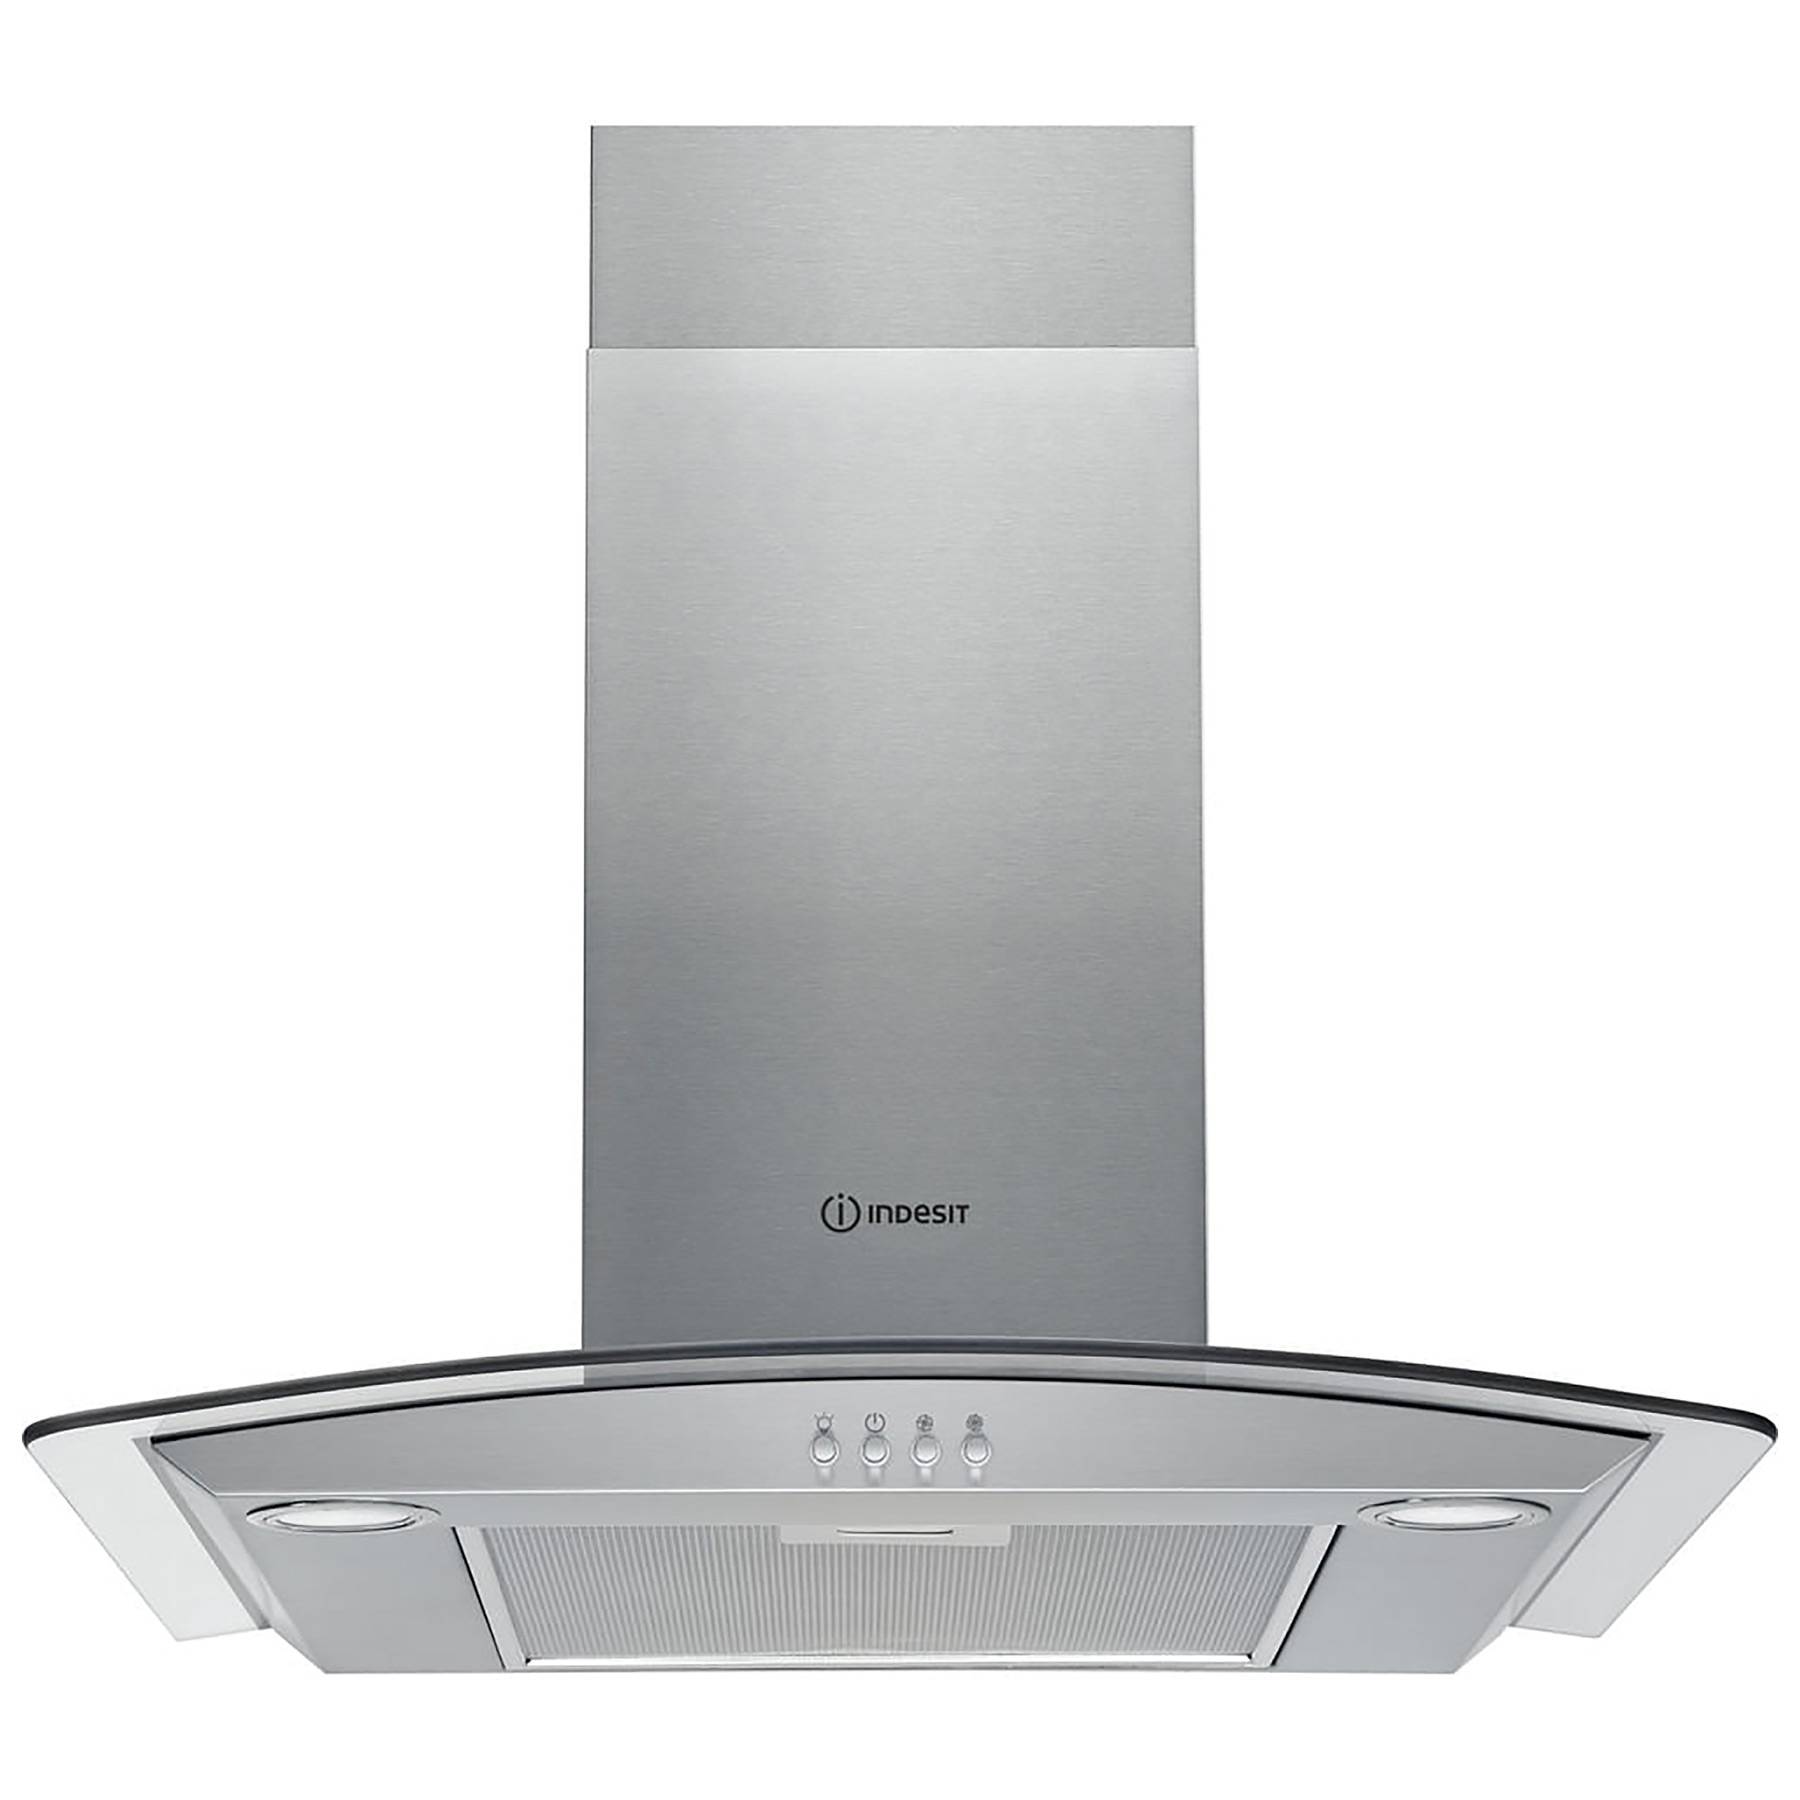 Image of Indesit IHGC6 5LMX 60cm Curved Glass Chimney Hood in St Steel 3 Speed